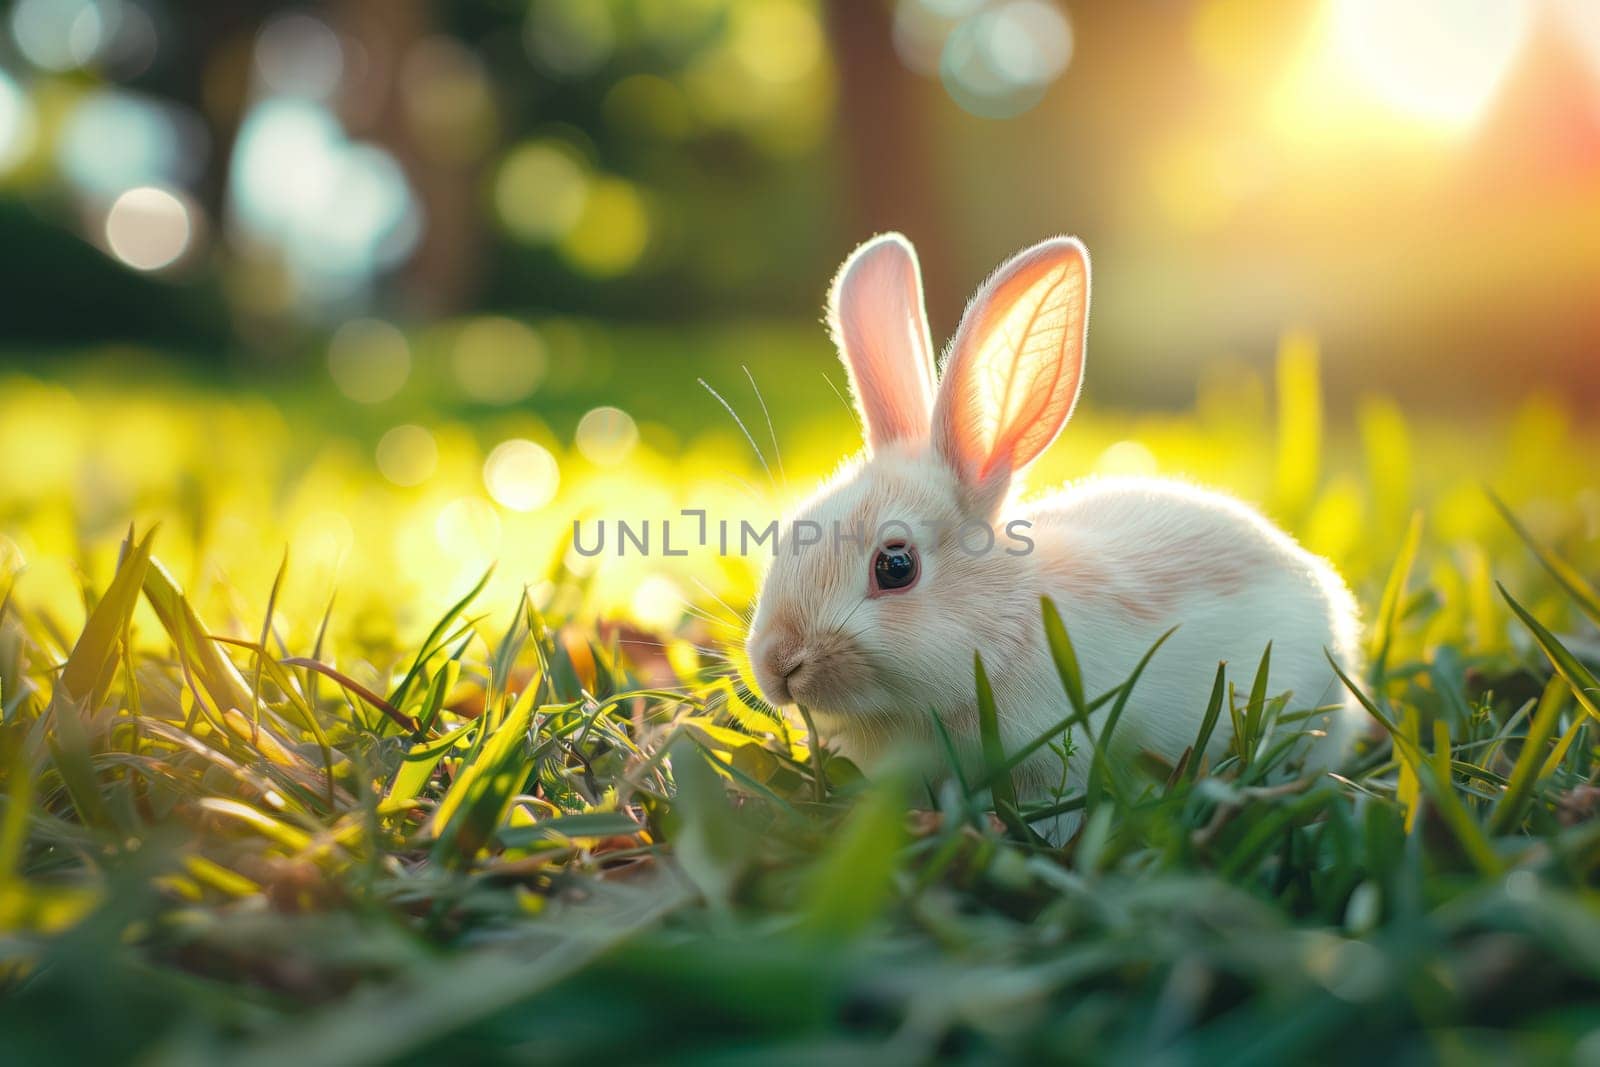 Bunny in Lush Green Field on Golden Hour by dimol